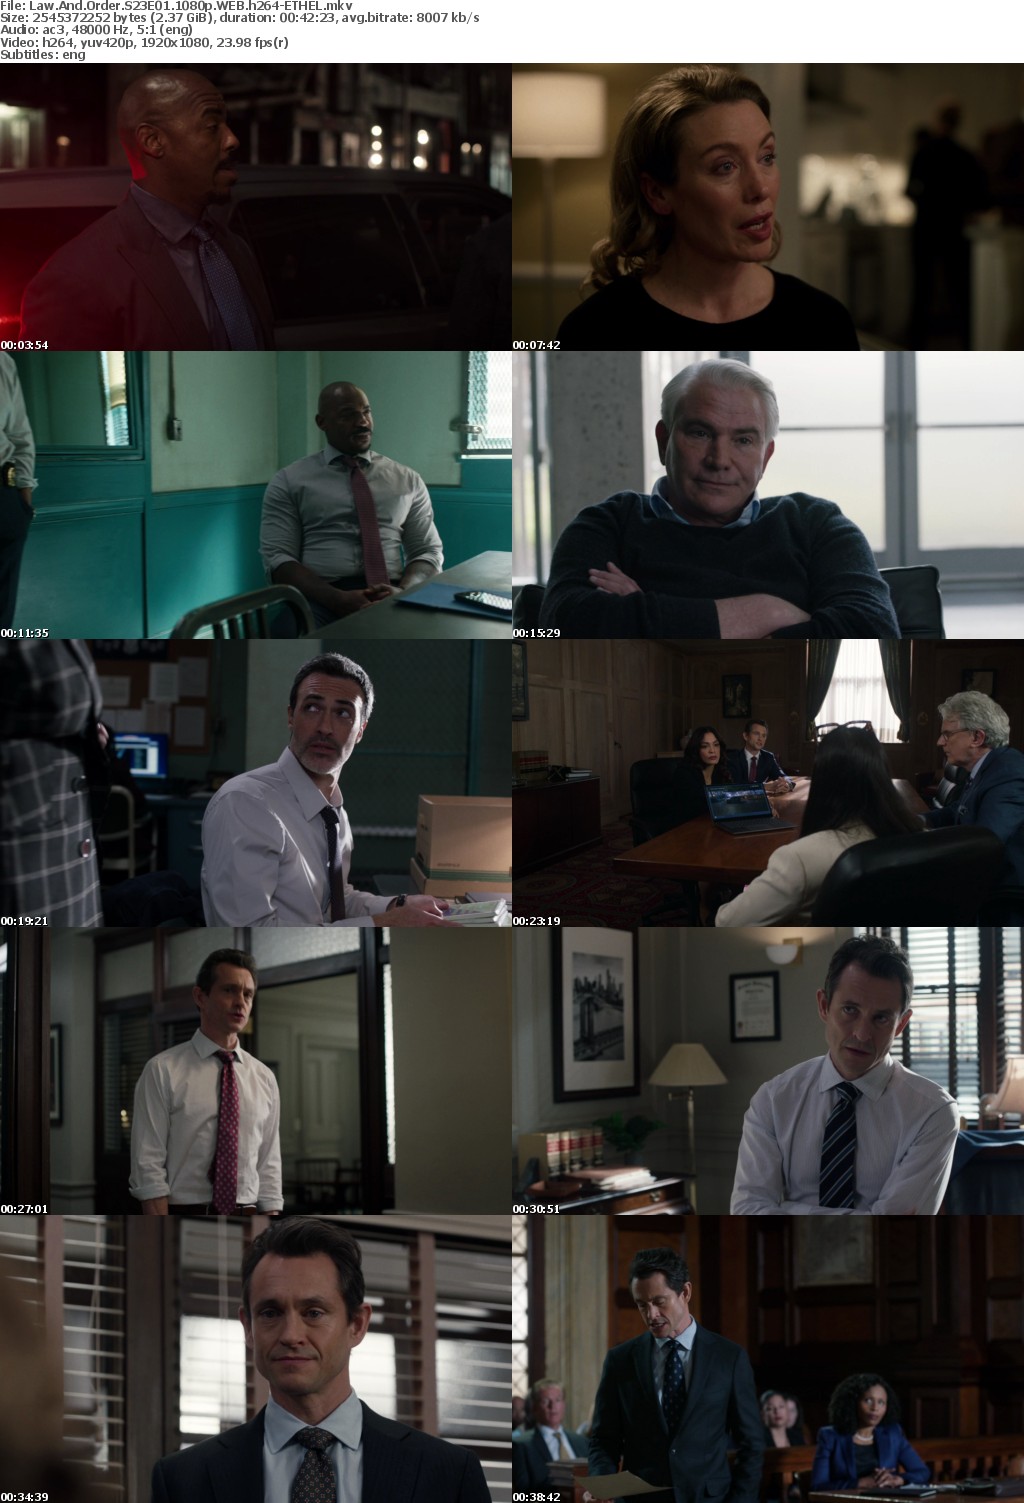 Law And Order S23E01 1080p WEB h264-ETHEL